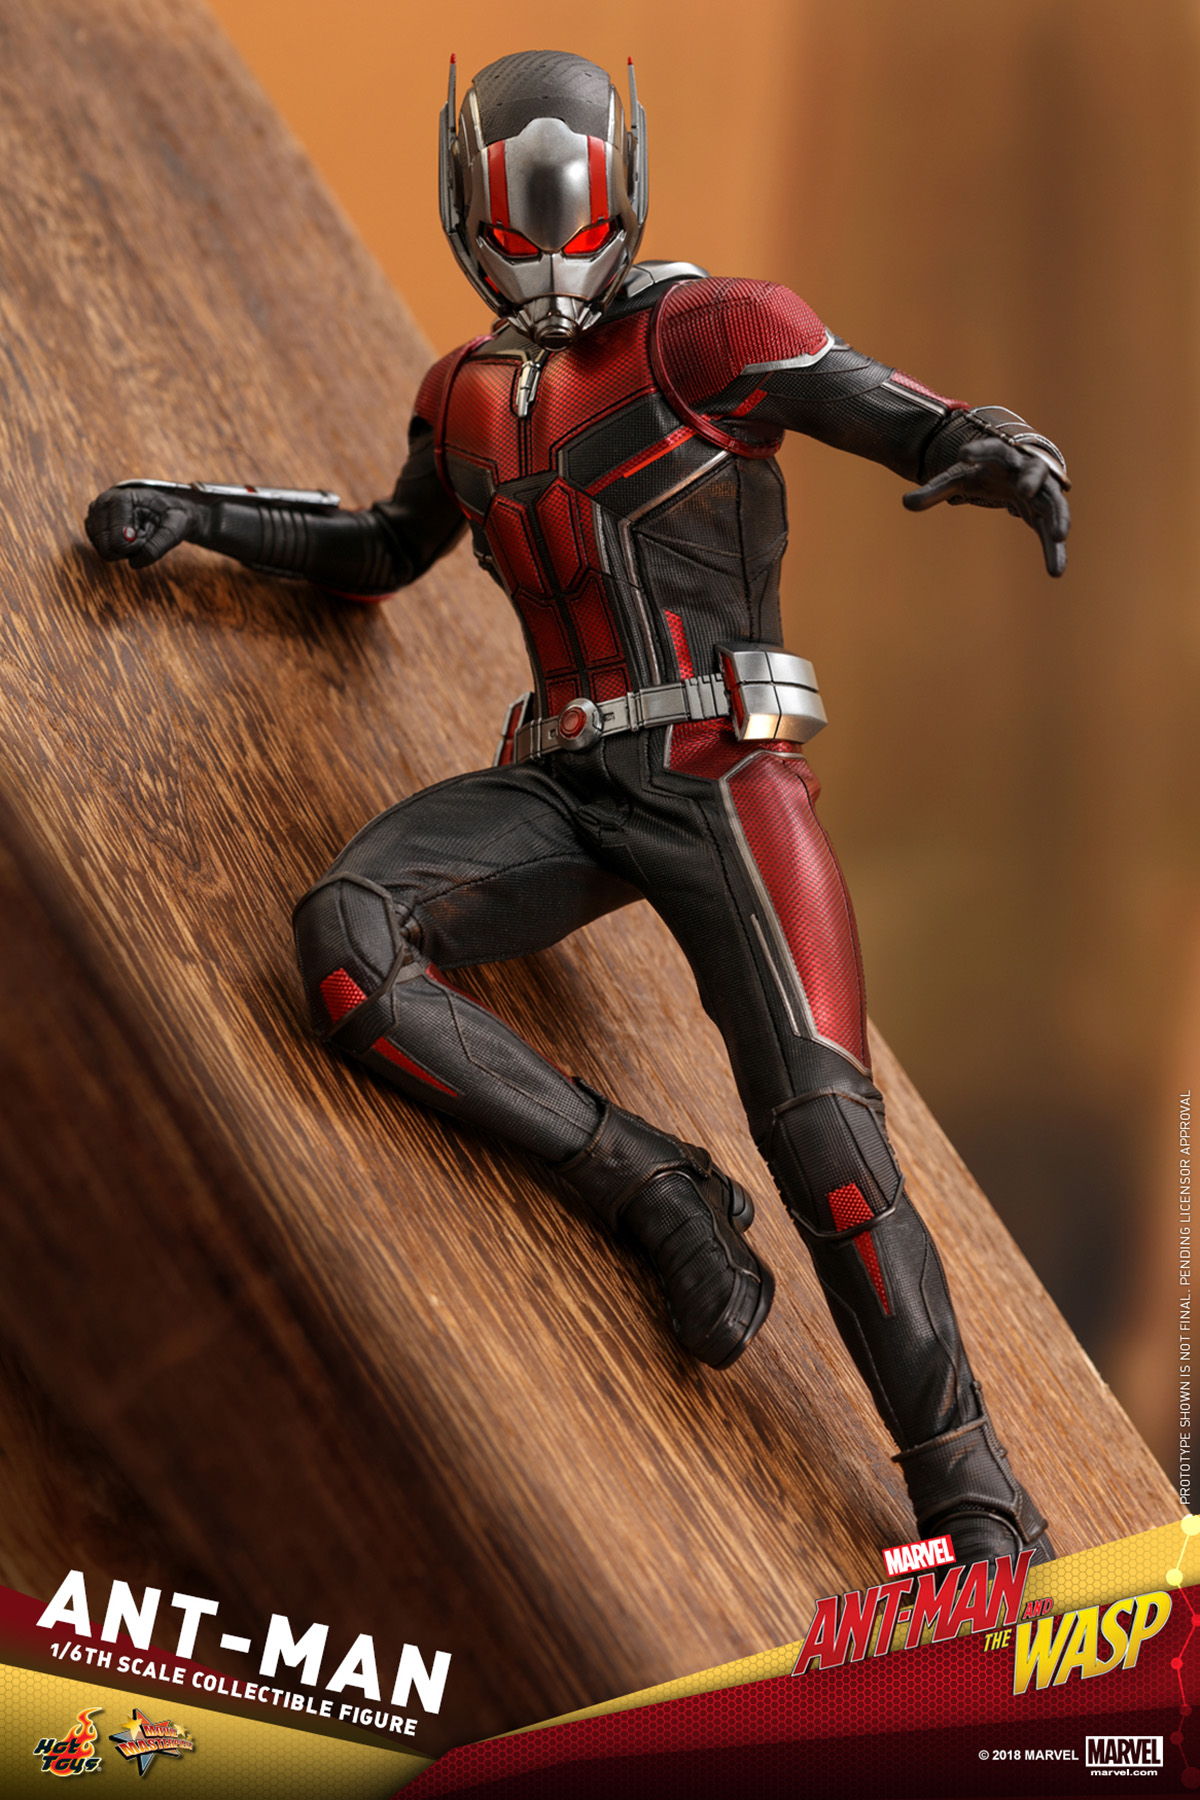 hot-toys-ant-man-and-the-wasp-ant-man-collectible-figure_pr7